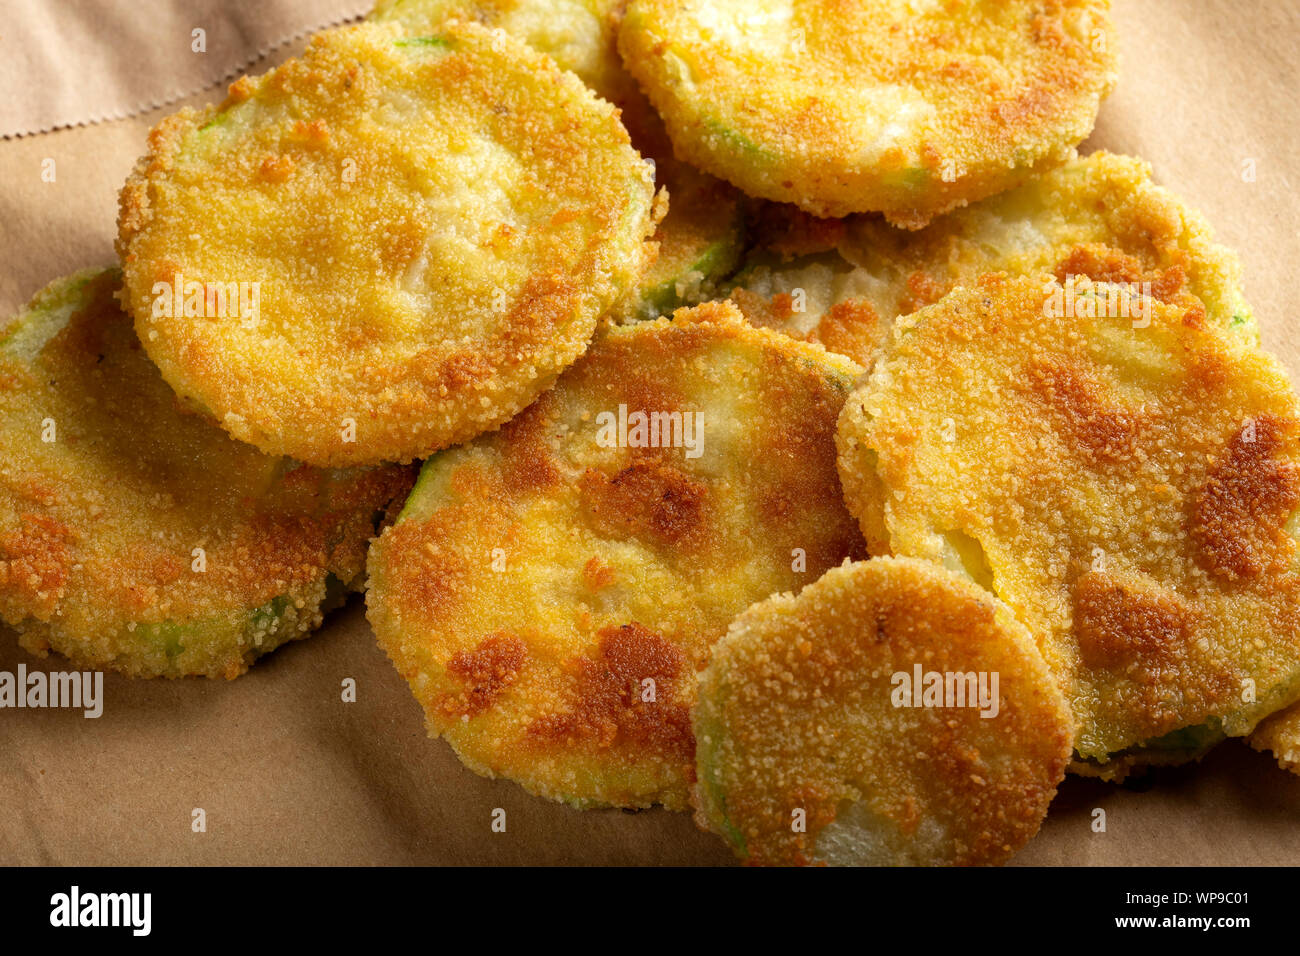 Fried slices of zucchini on paper Stock Photo